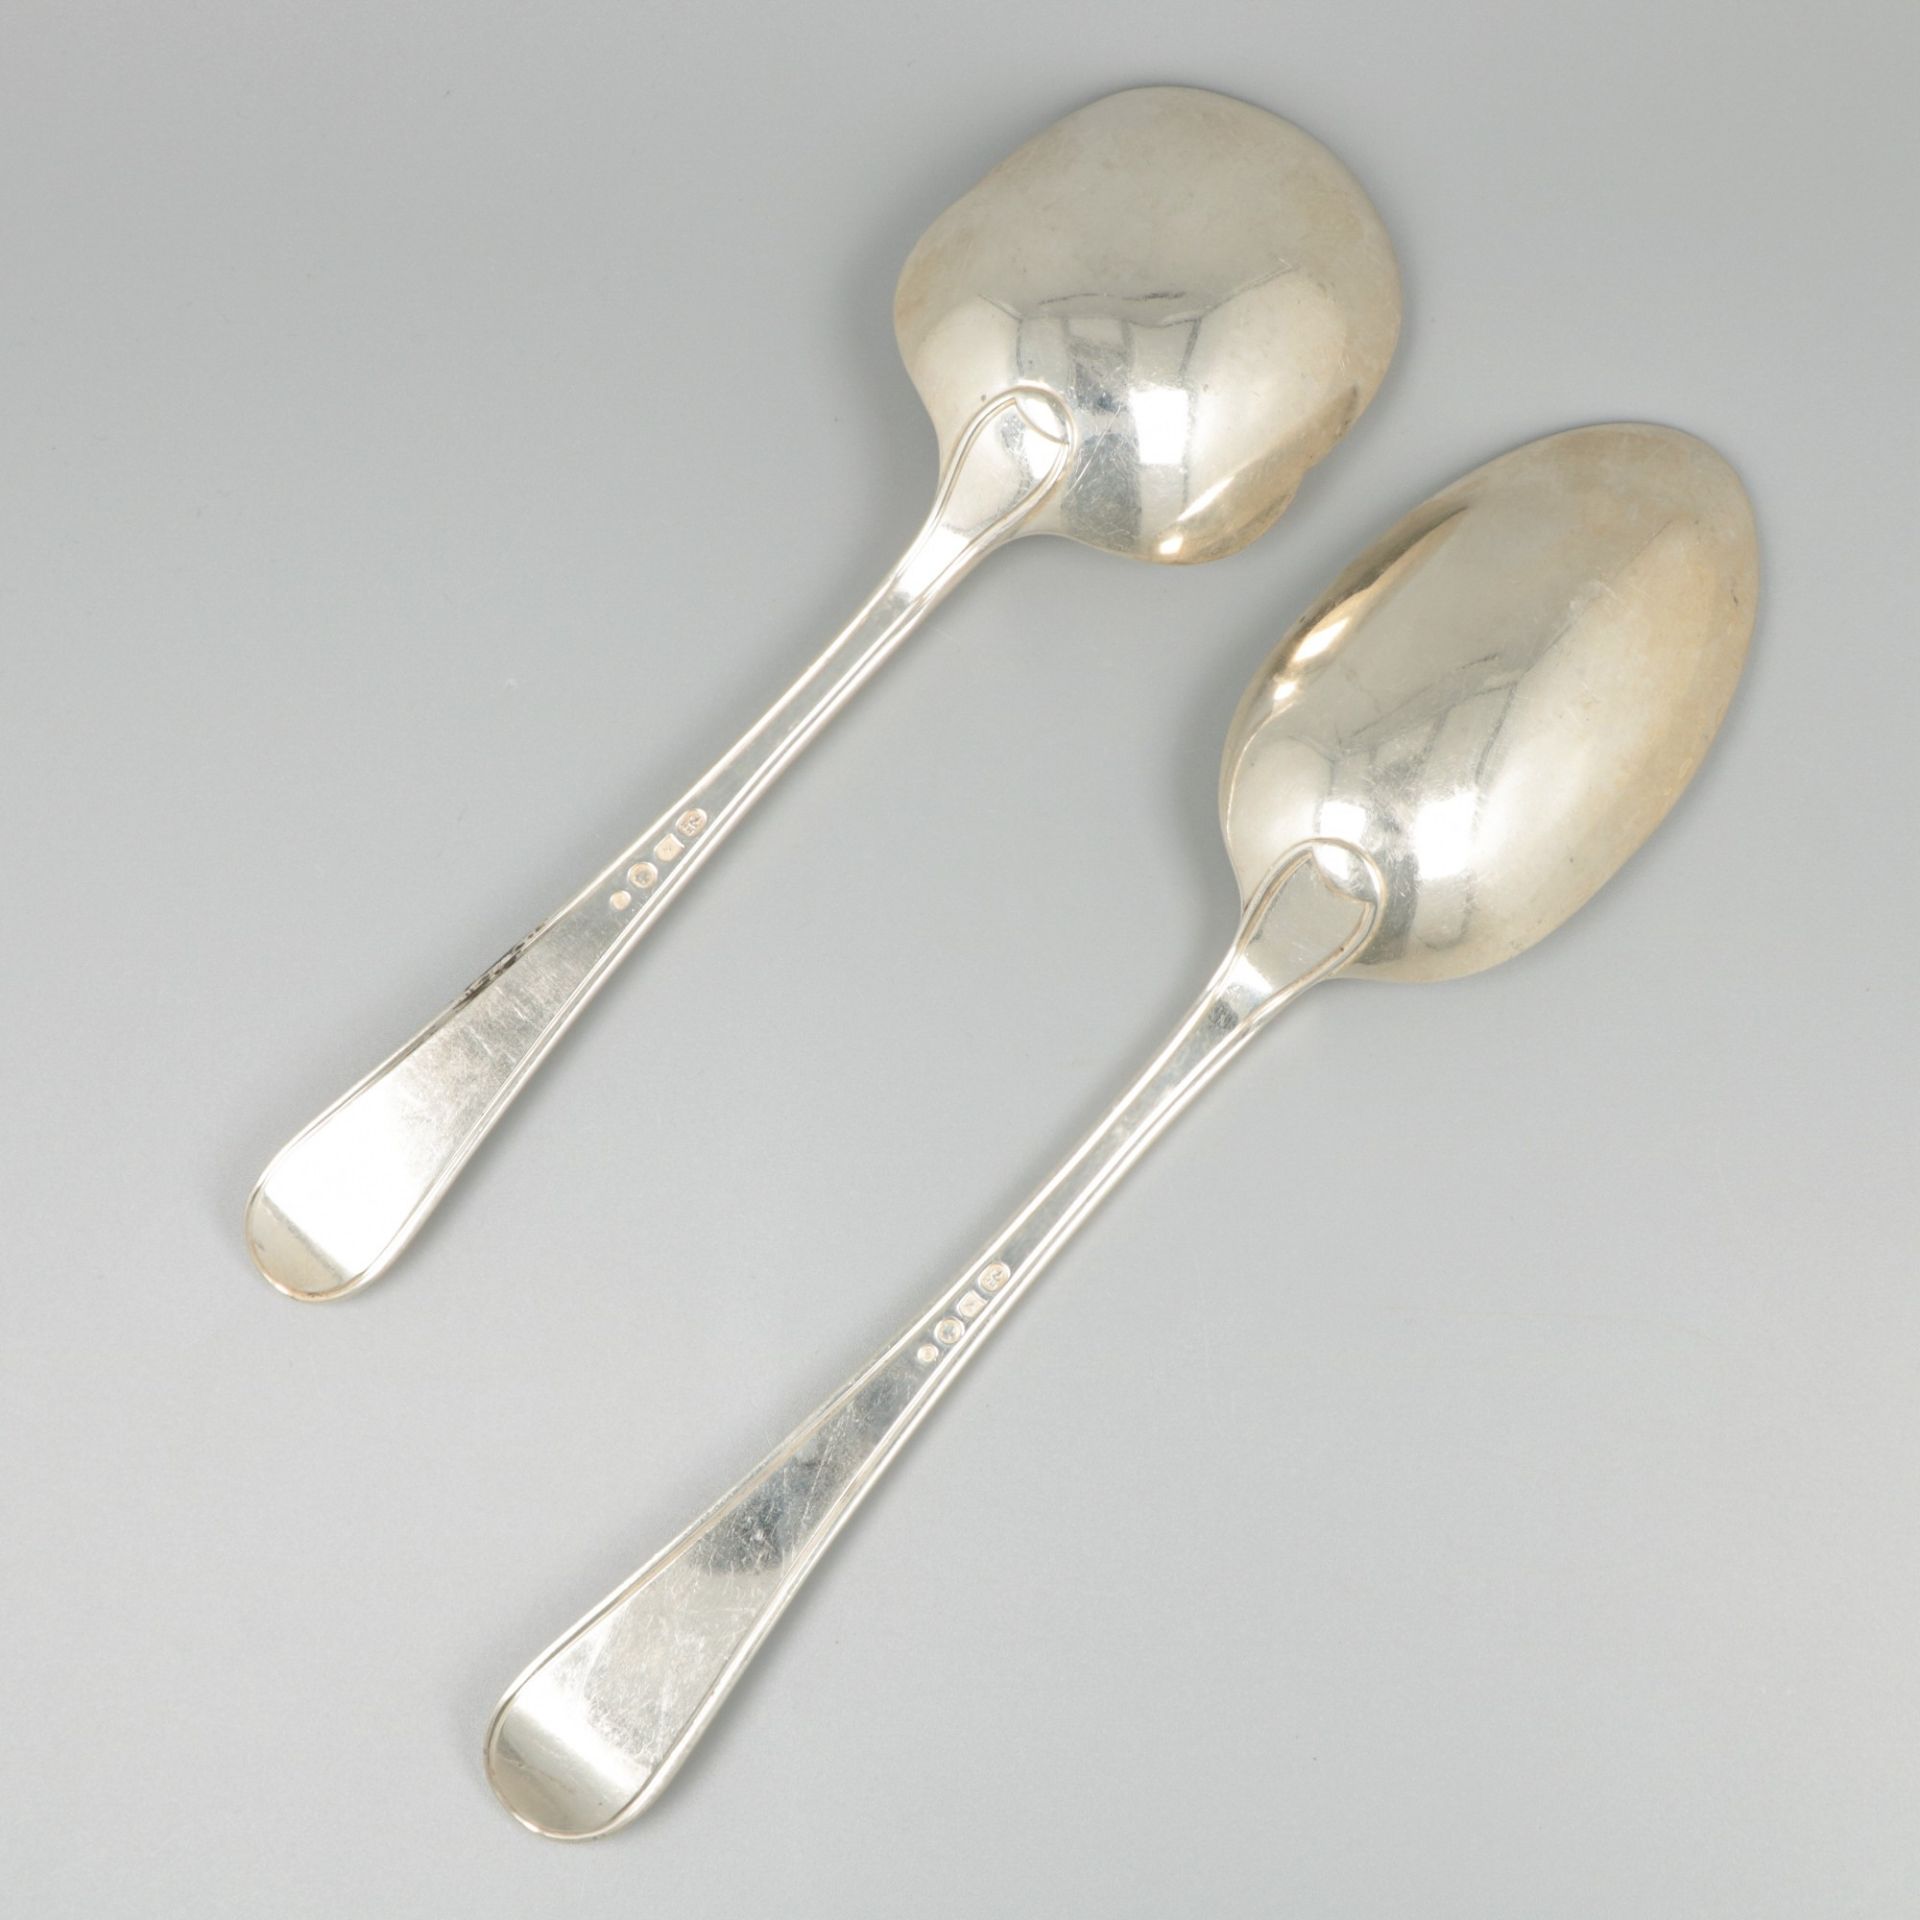 2-piece lot of serving spoons silver. - Image 4 of 6